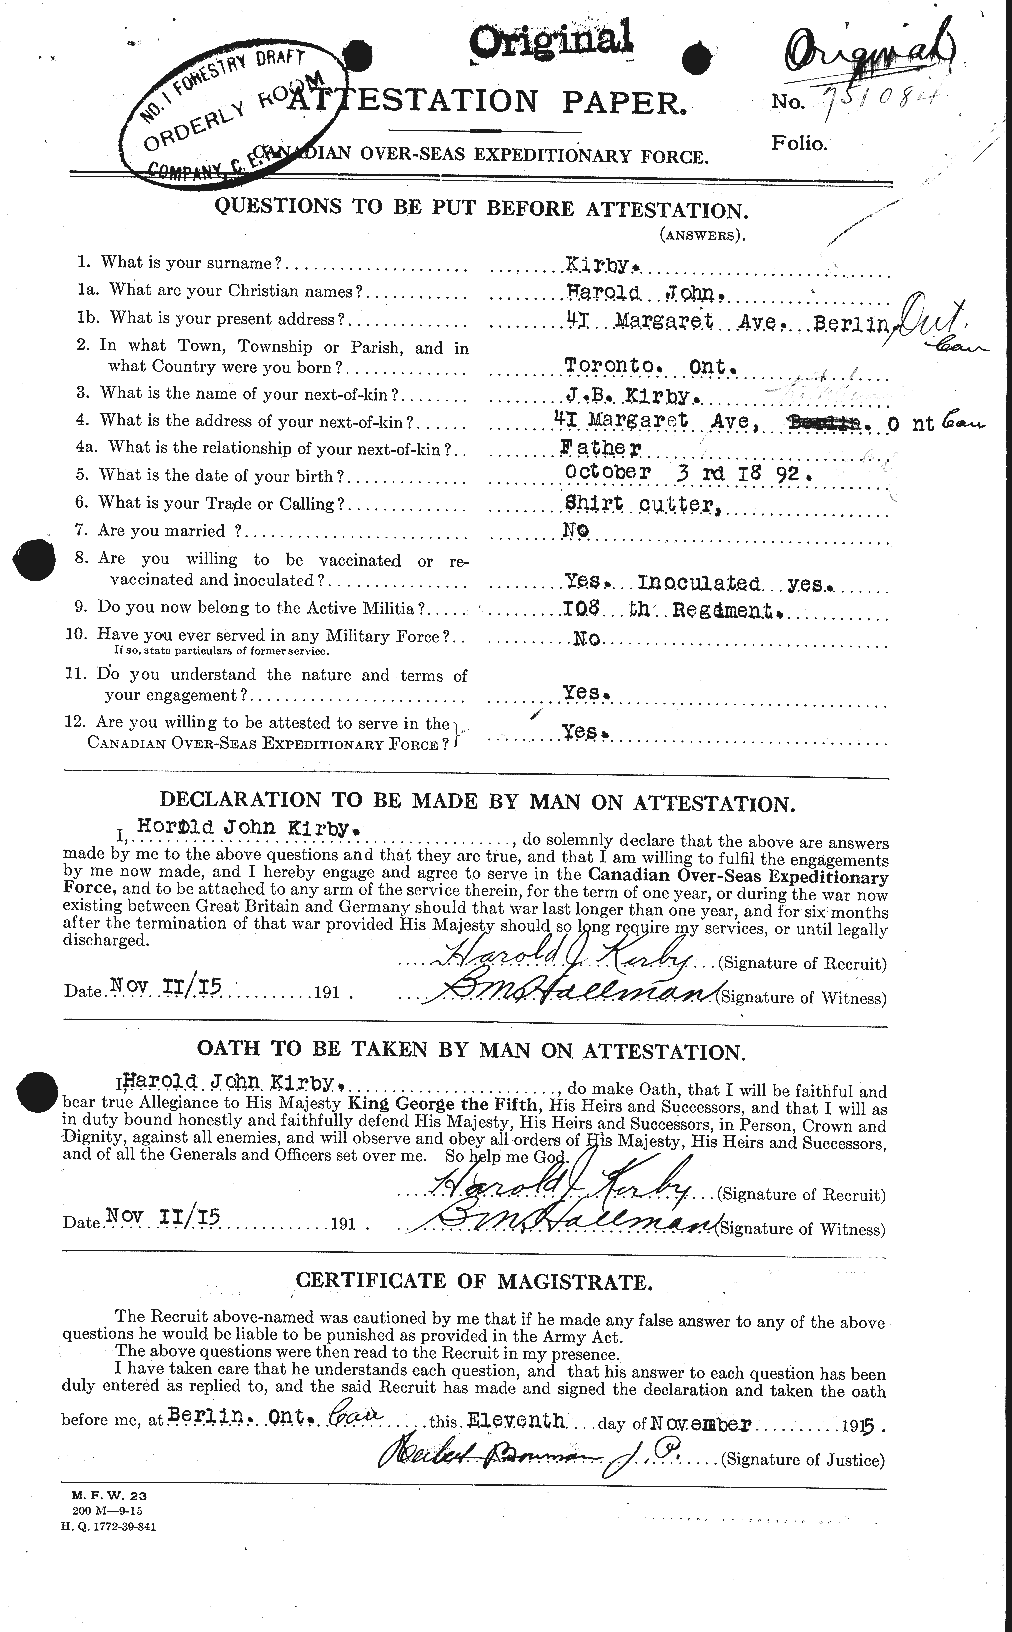 Personnel Records of the First World War - CEF 437208a